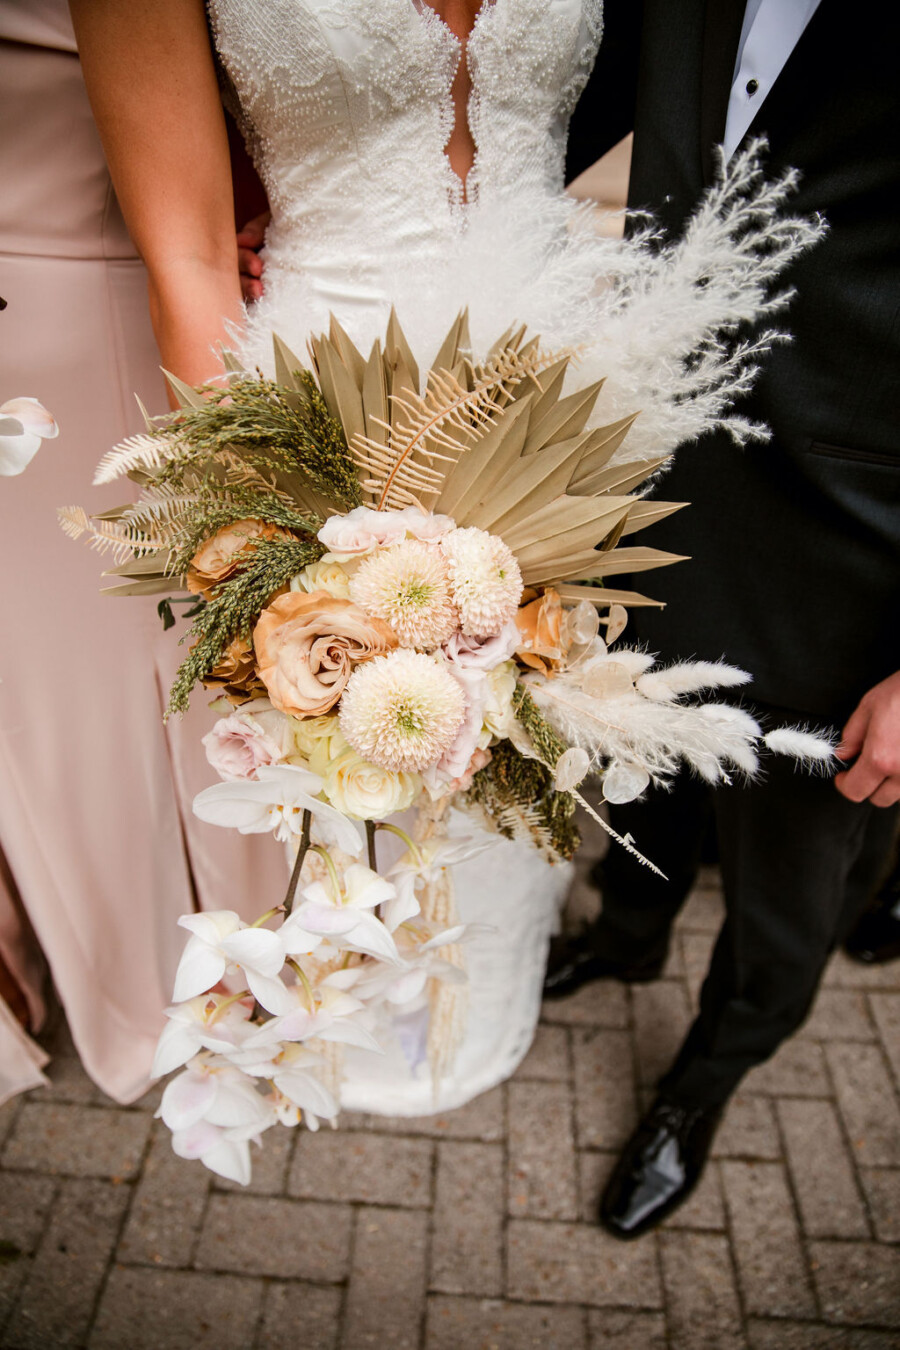 Whimsical wedding bouquet